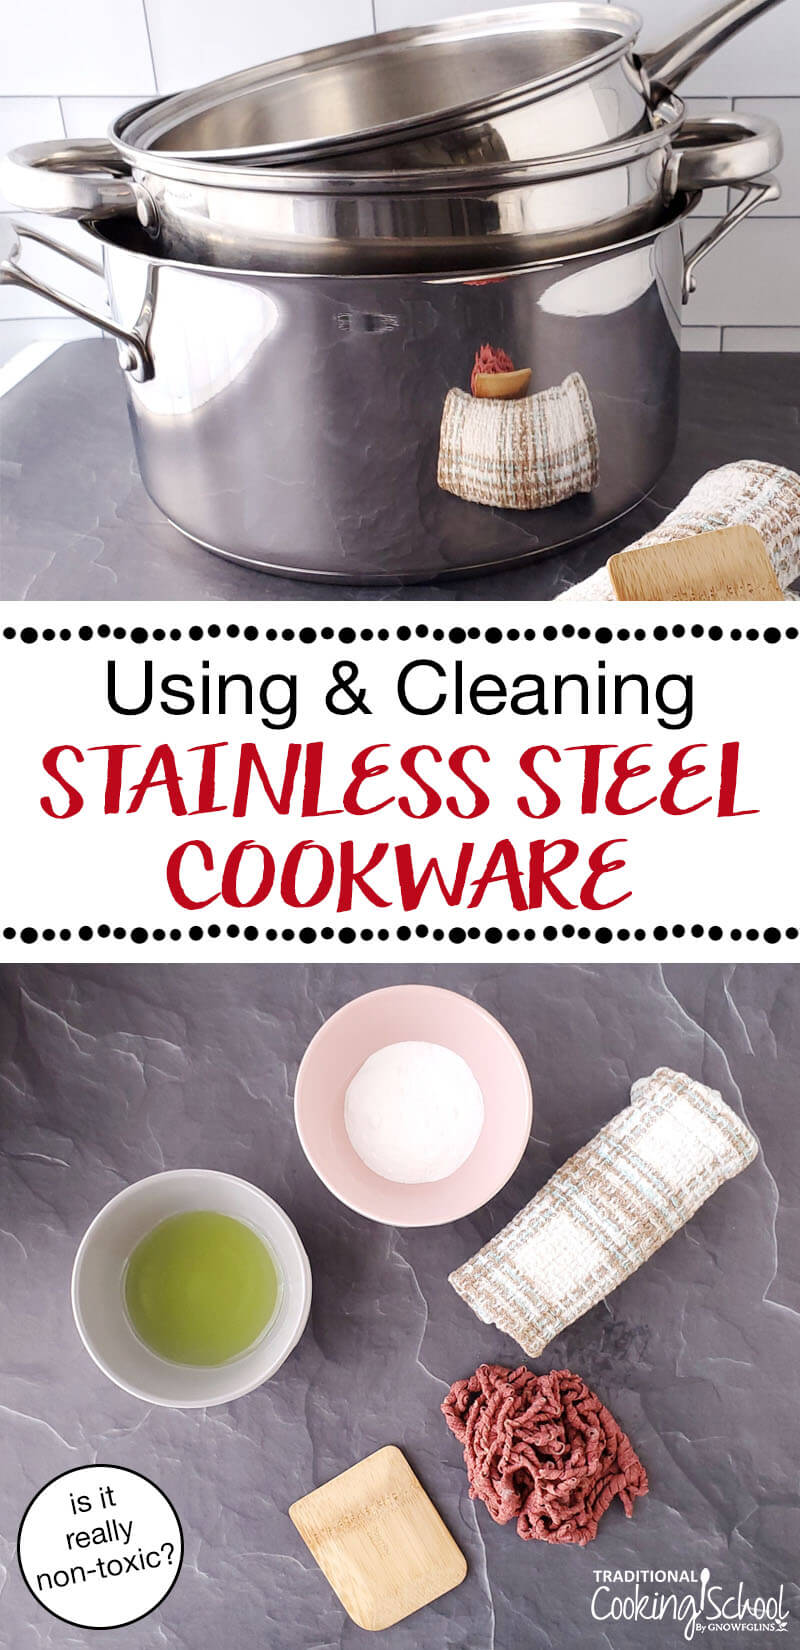 photo collage of stainless steel pots and pans and non-toxic cleaners, with text overlay: "Using & Cleaning Stainless Steel Cookware (is it really non-toxic?)"